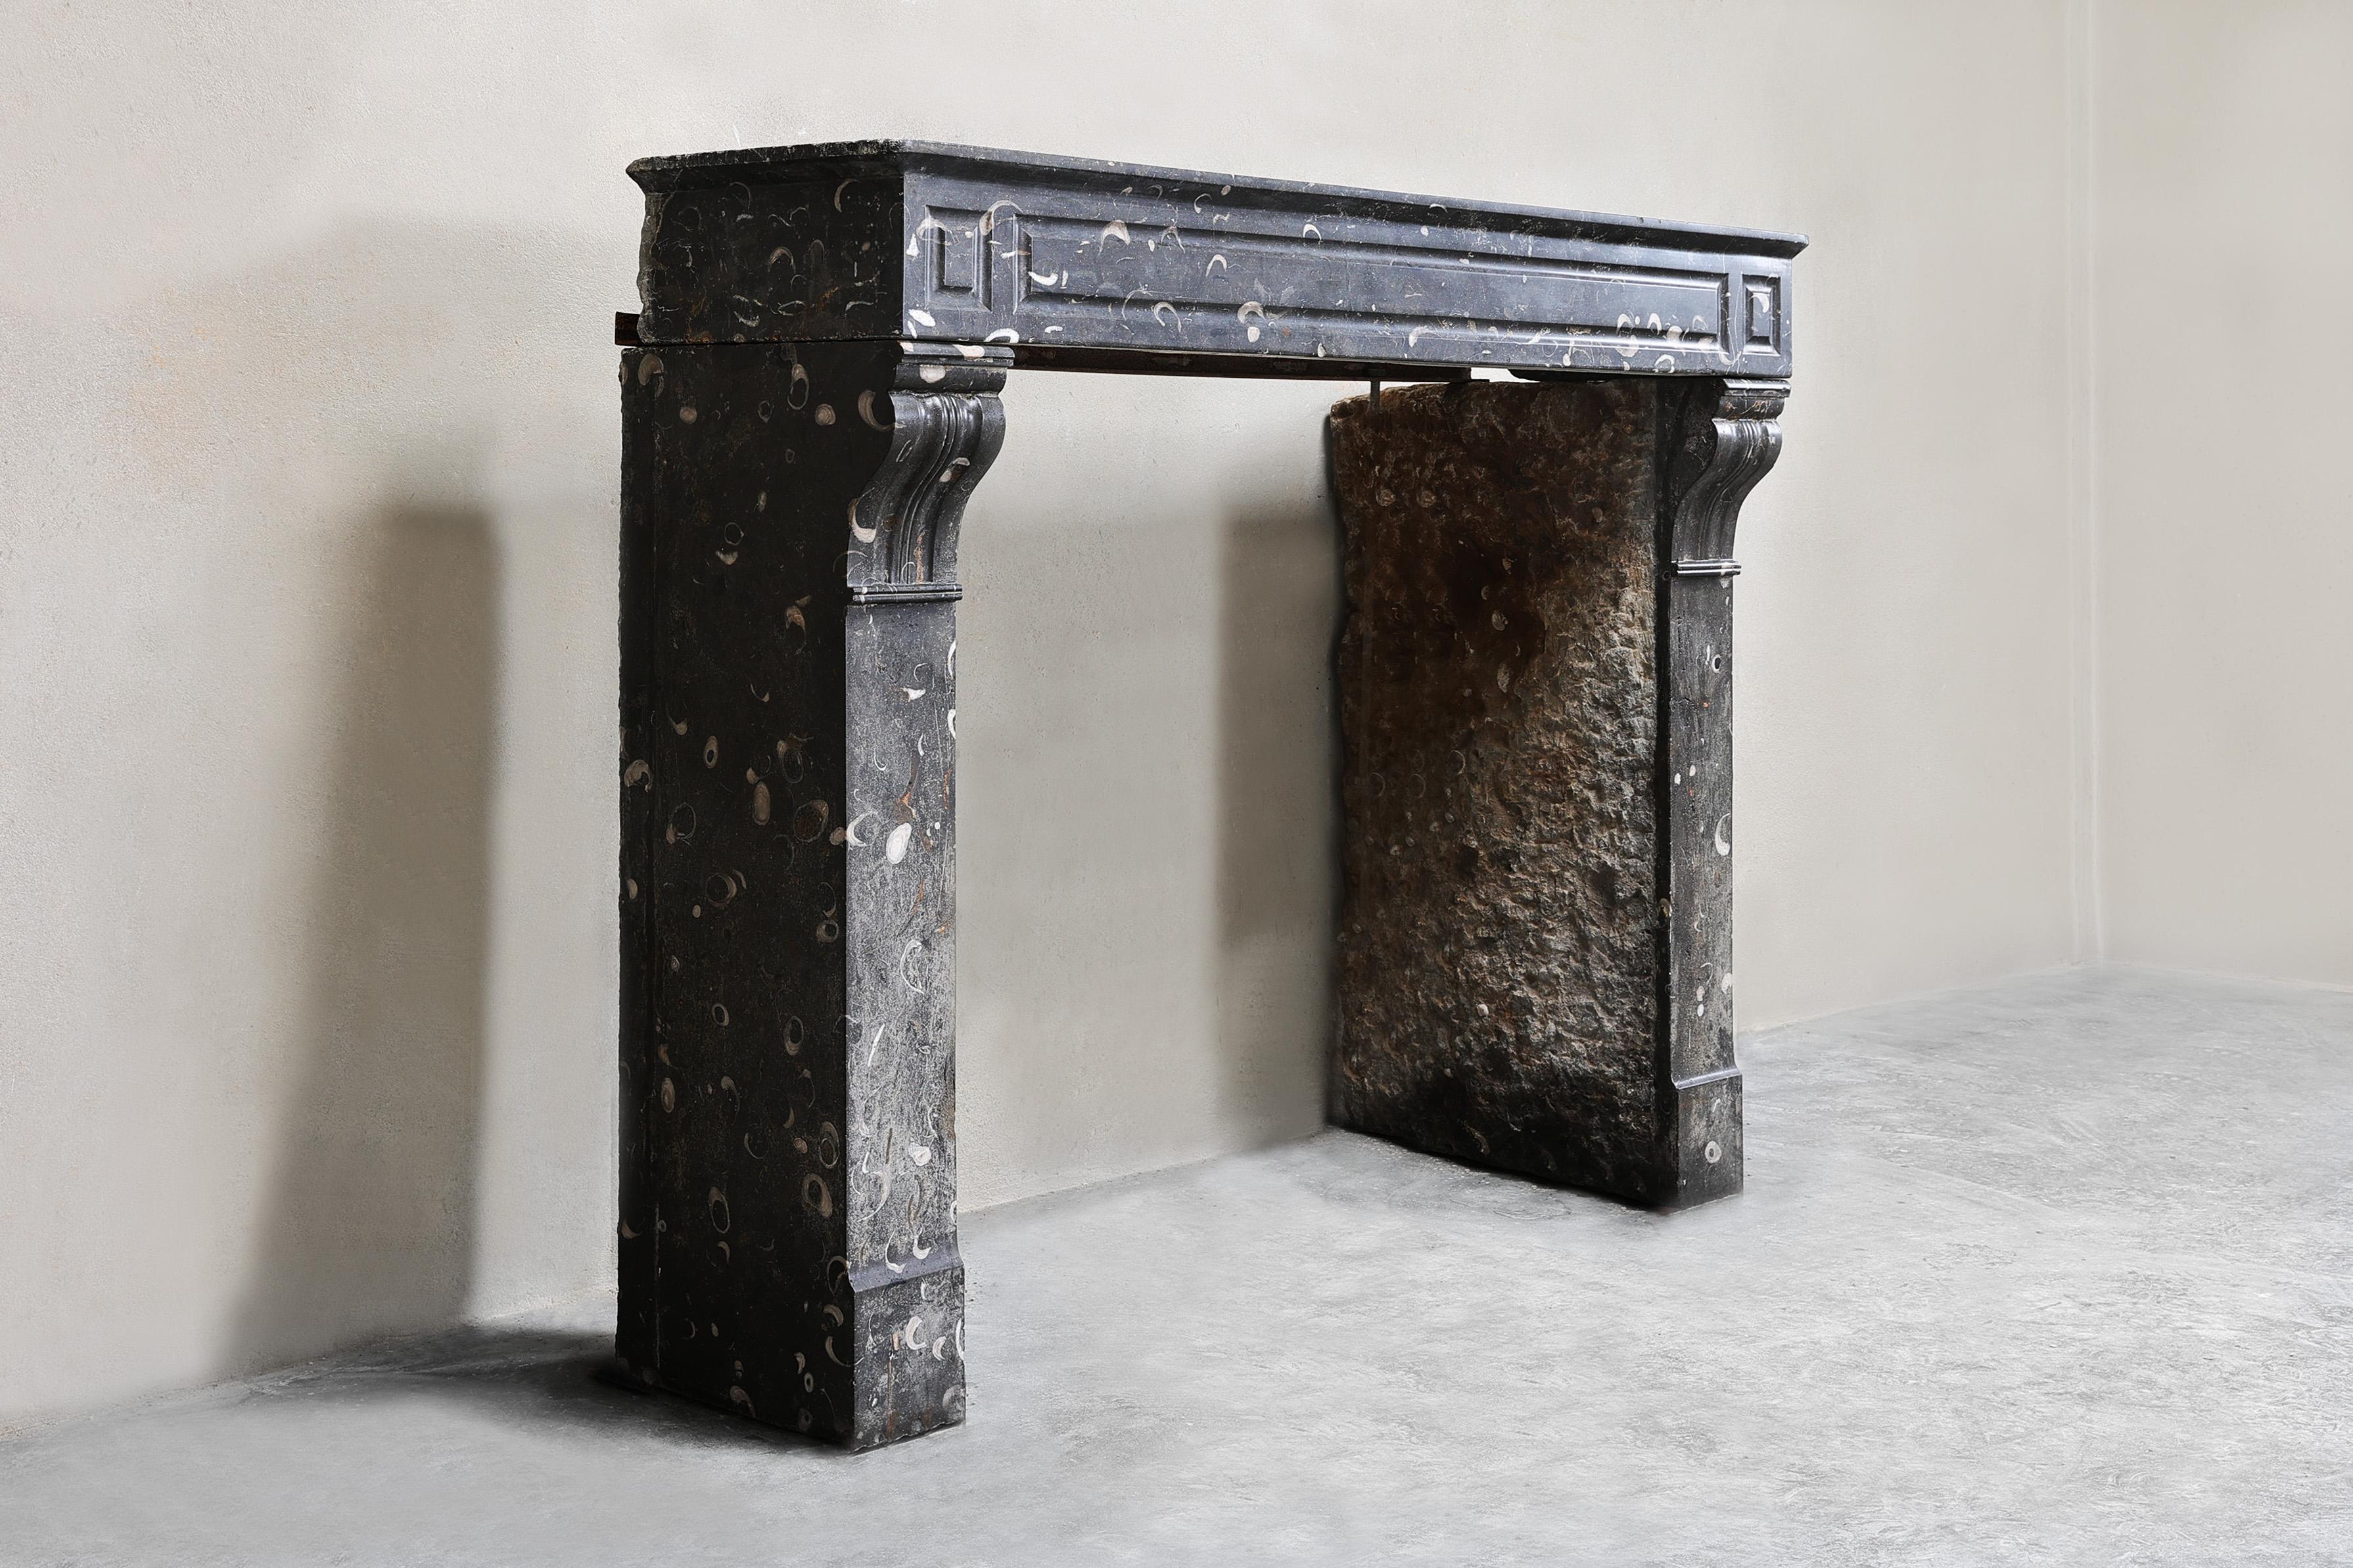 Beautiful antique mantelpiece made of beautiful black marble with light veins from the 19th century in the style of Louis XVI. This mantelpiece has a warm color nuance and beautiful straight shapes! A chic antique mantle that is compact in size and